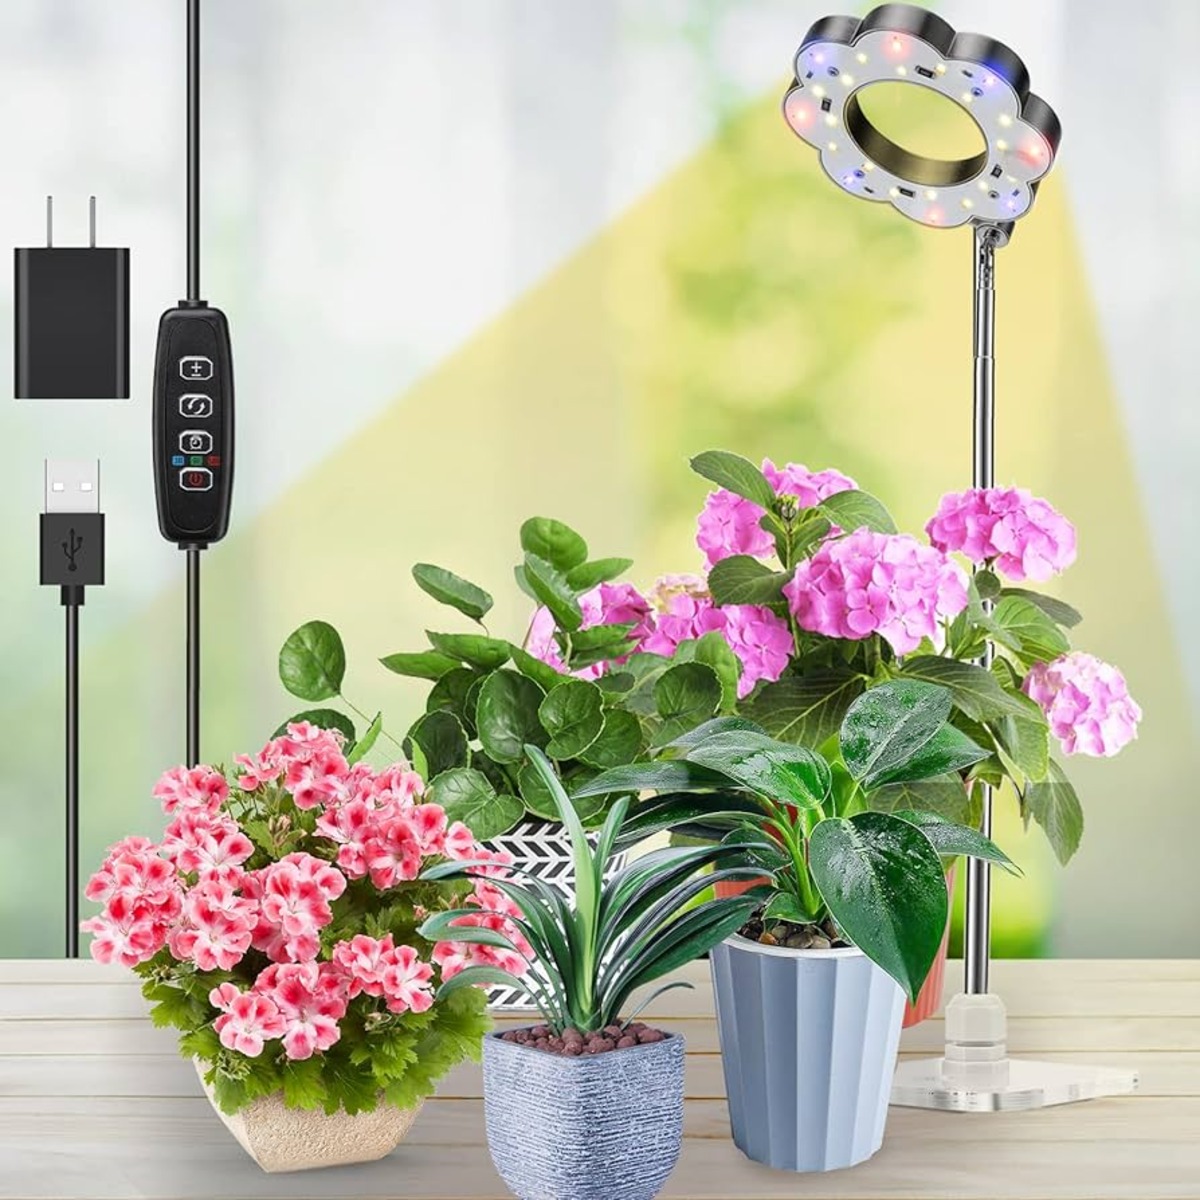 10 Amazing Plant Lights For Indoor Plants for 2023